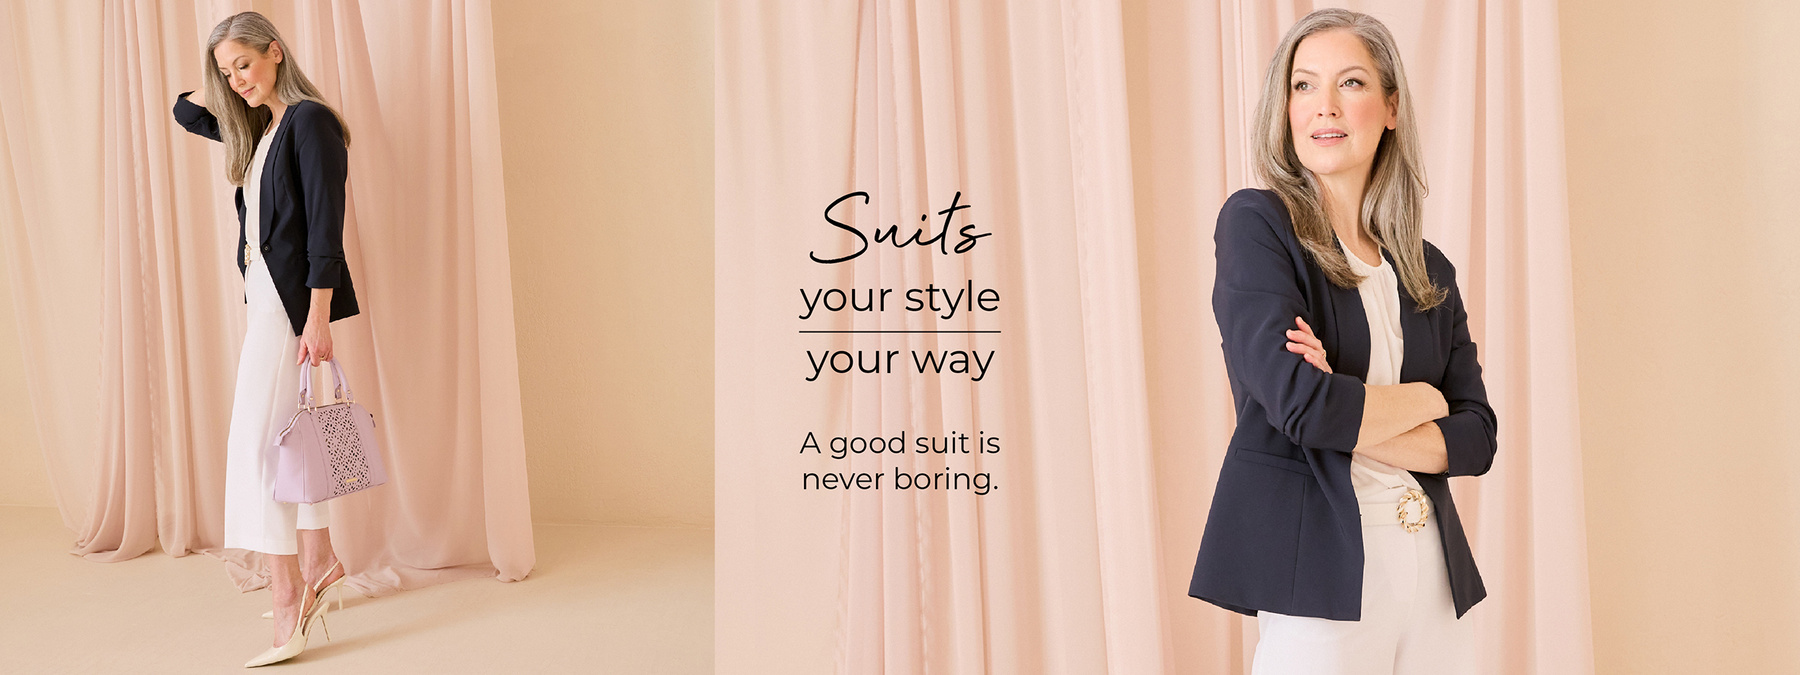 Suits your style your way. A good suit is never boring.